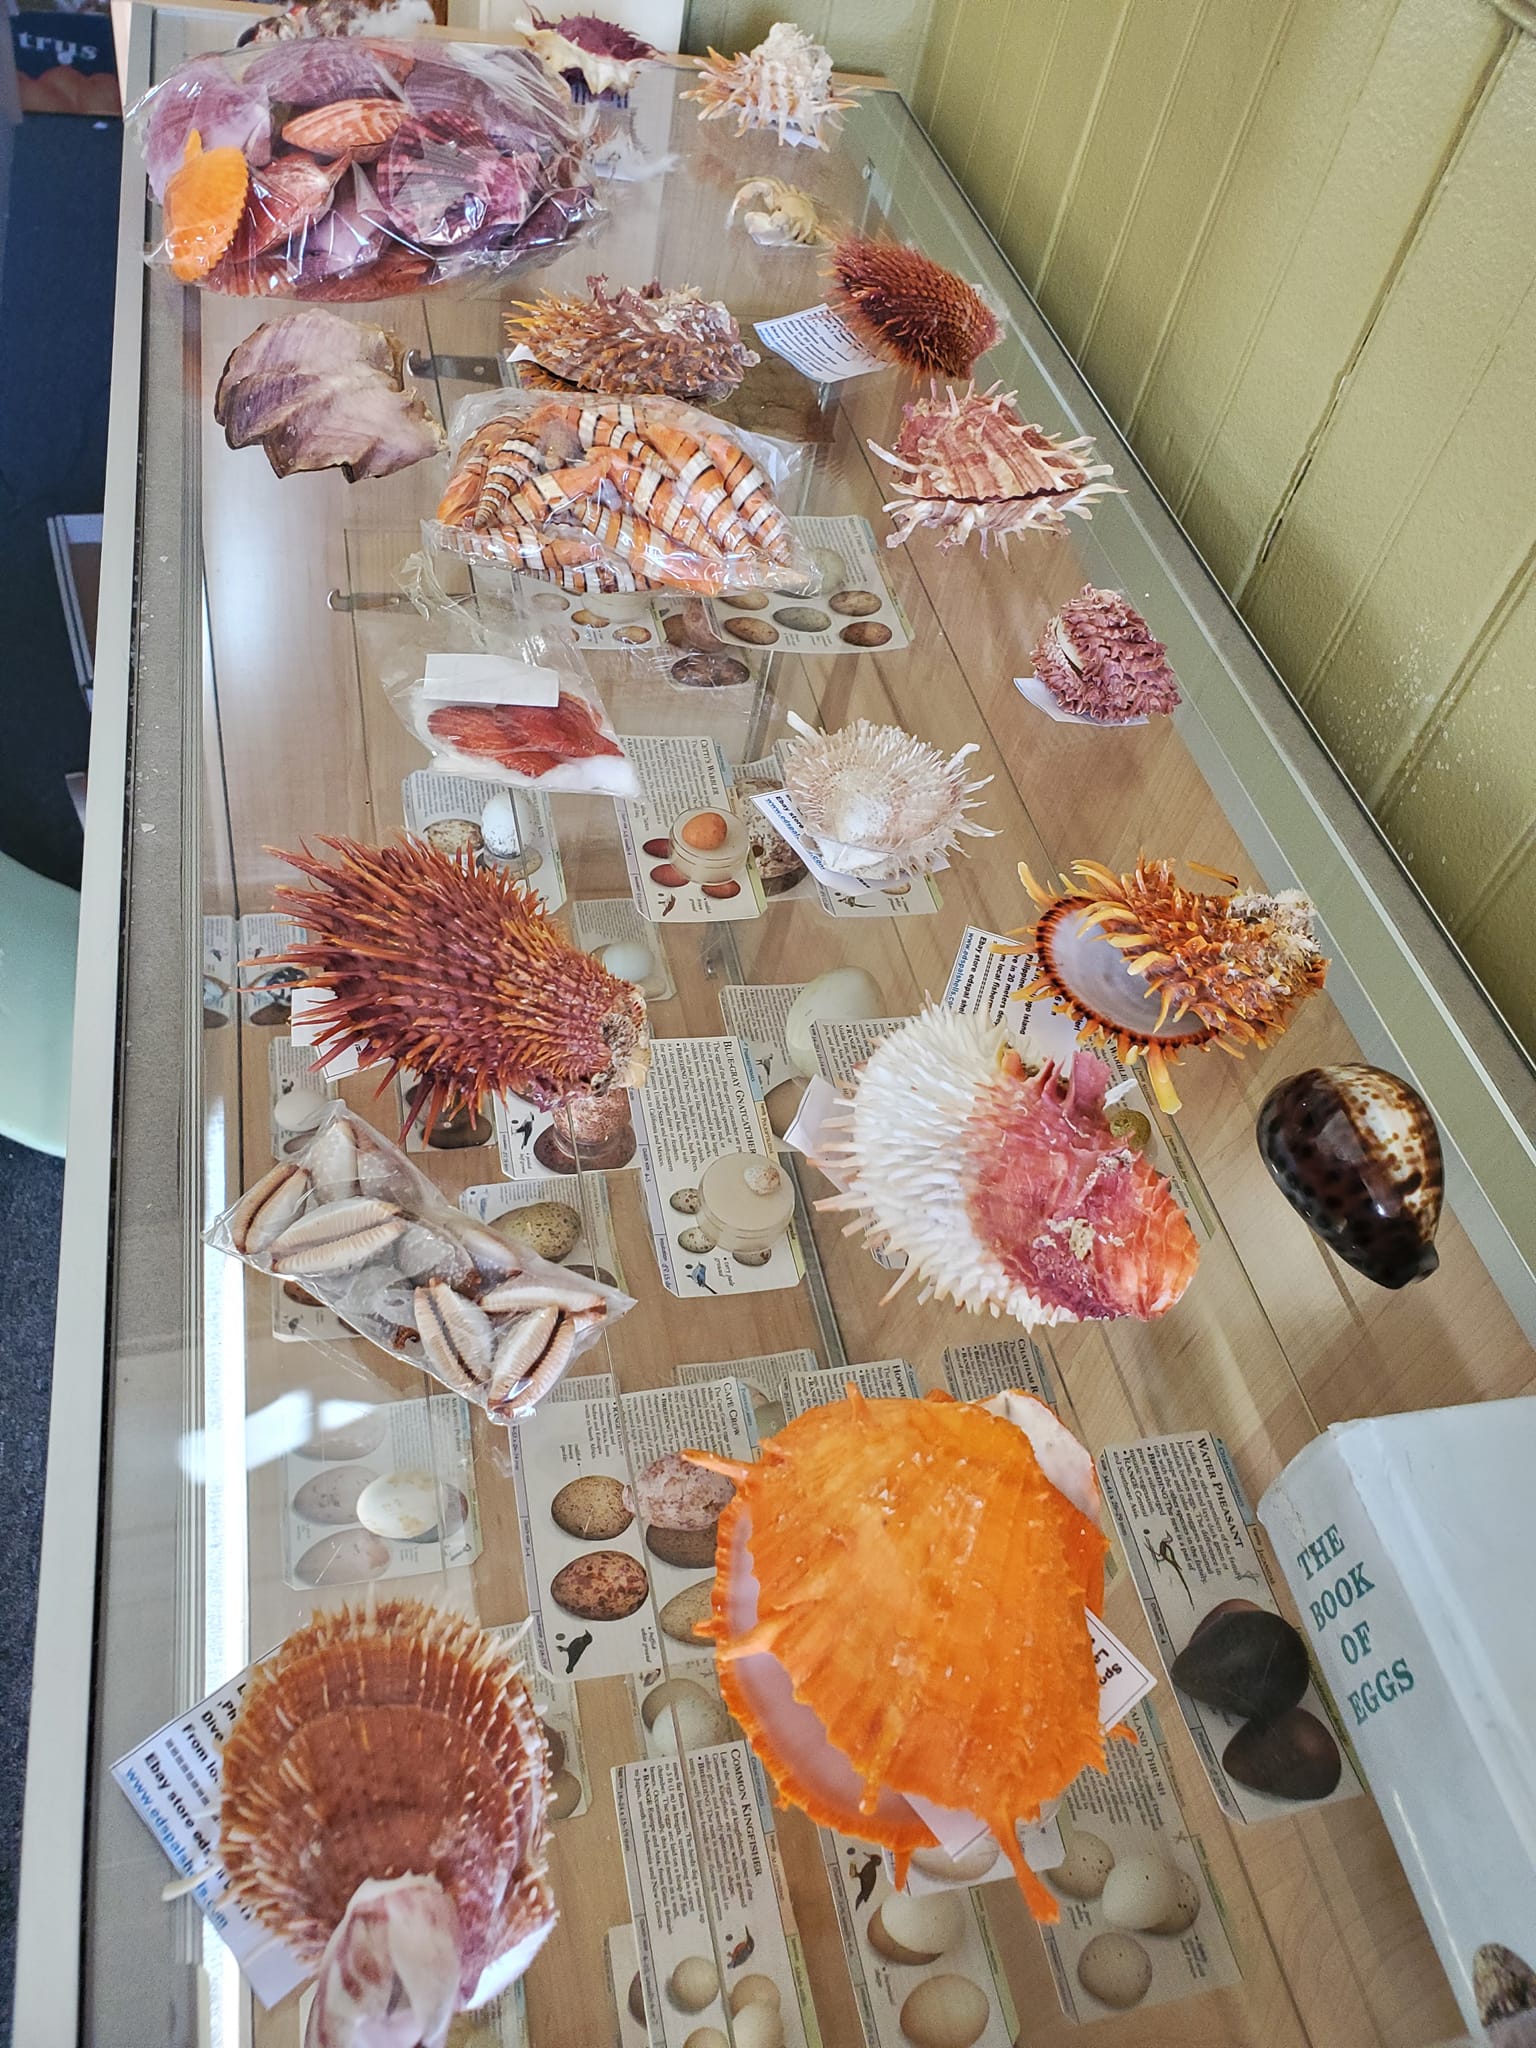 Shells form the Julian Natural History Museum Photo